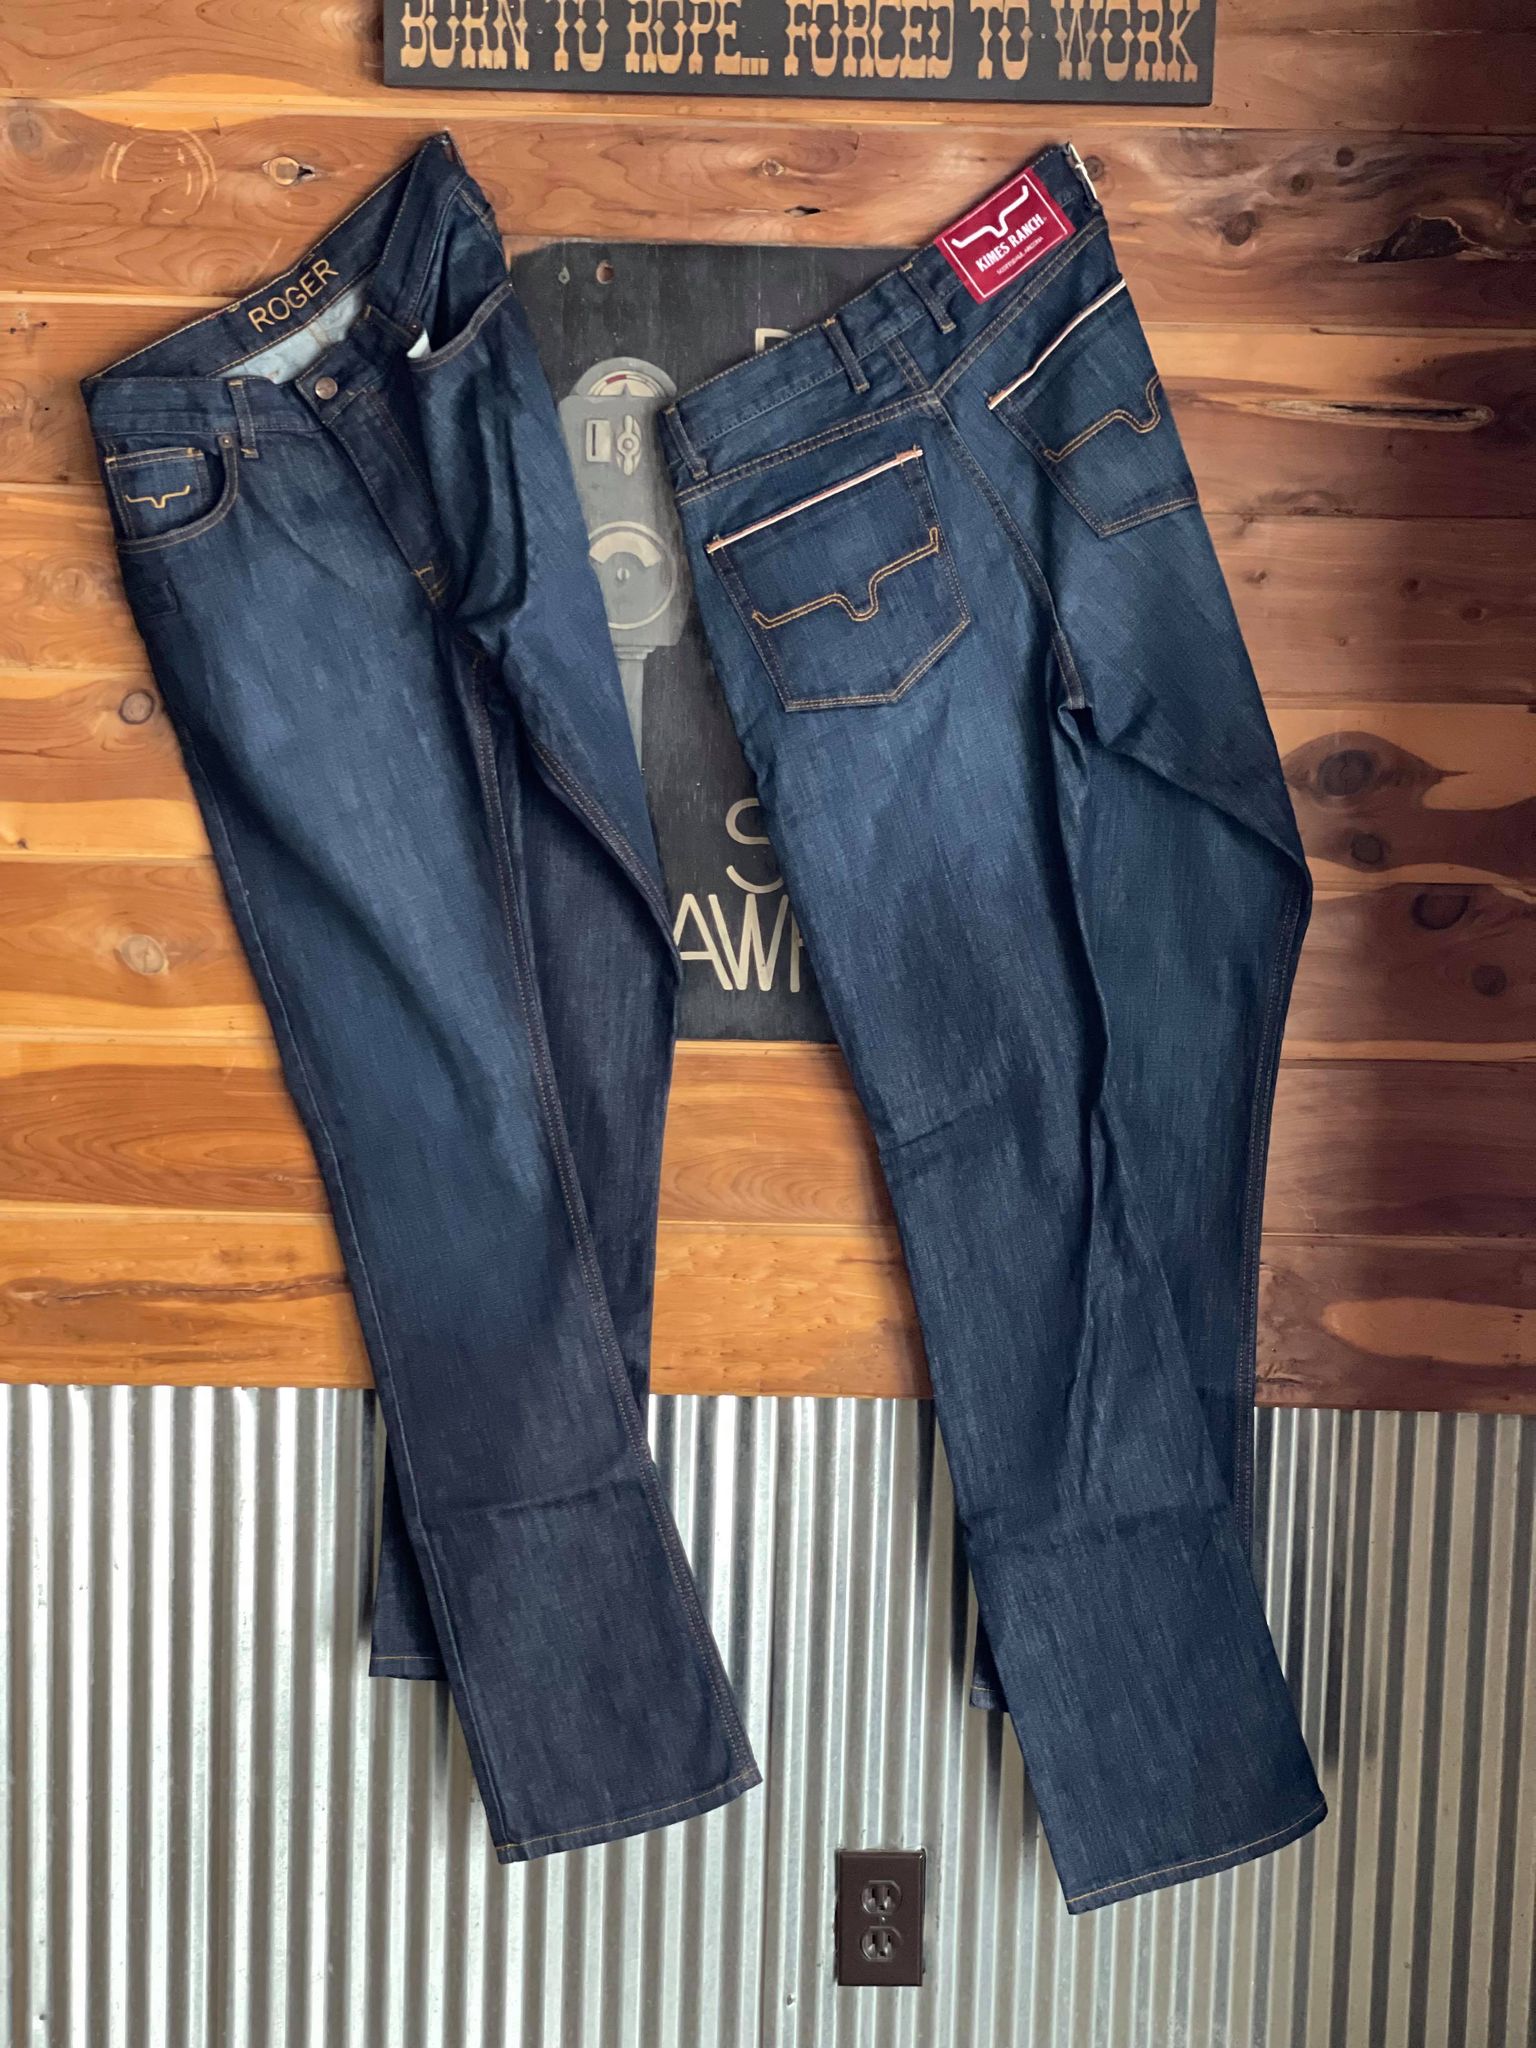 Kimes Ranch Roger-Men's Denim-Kimes Ranch-Lucky J Boots & More, Women's, Men's, & Kids Western Store Located in Carthage, MO